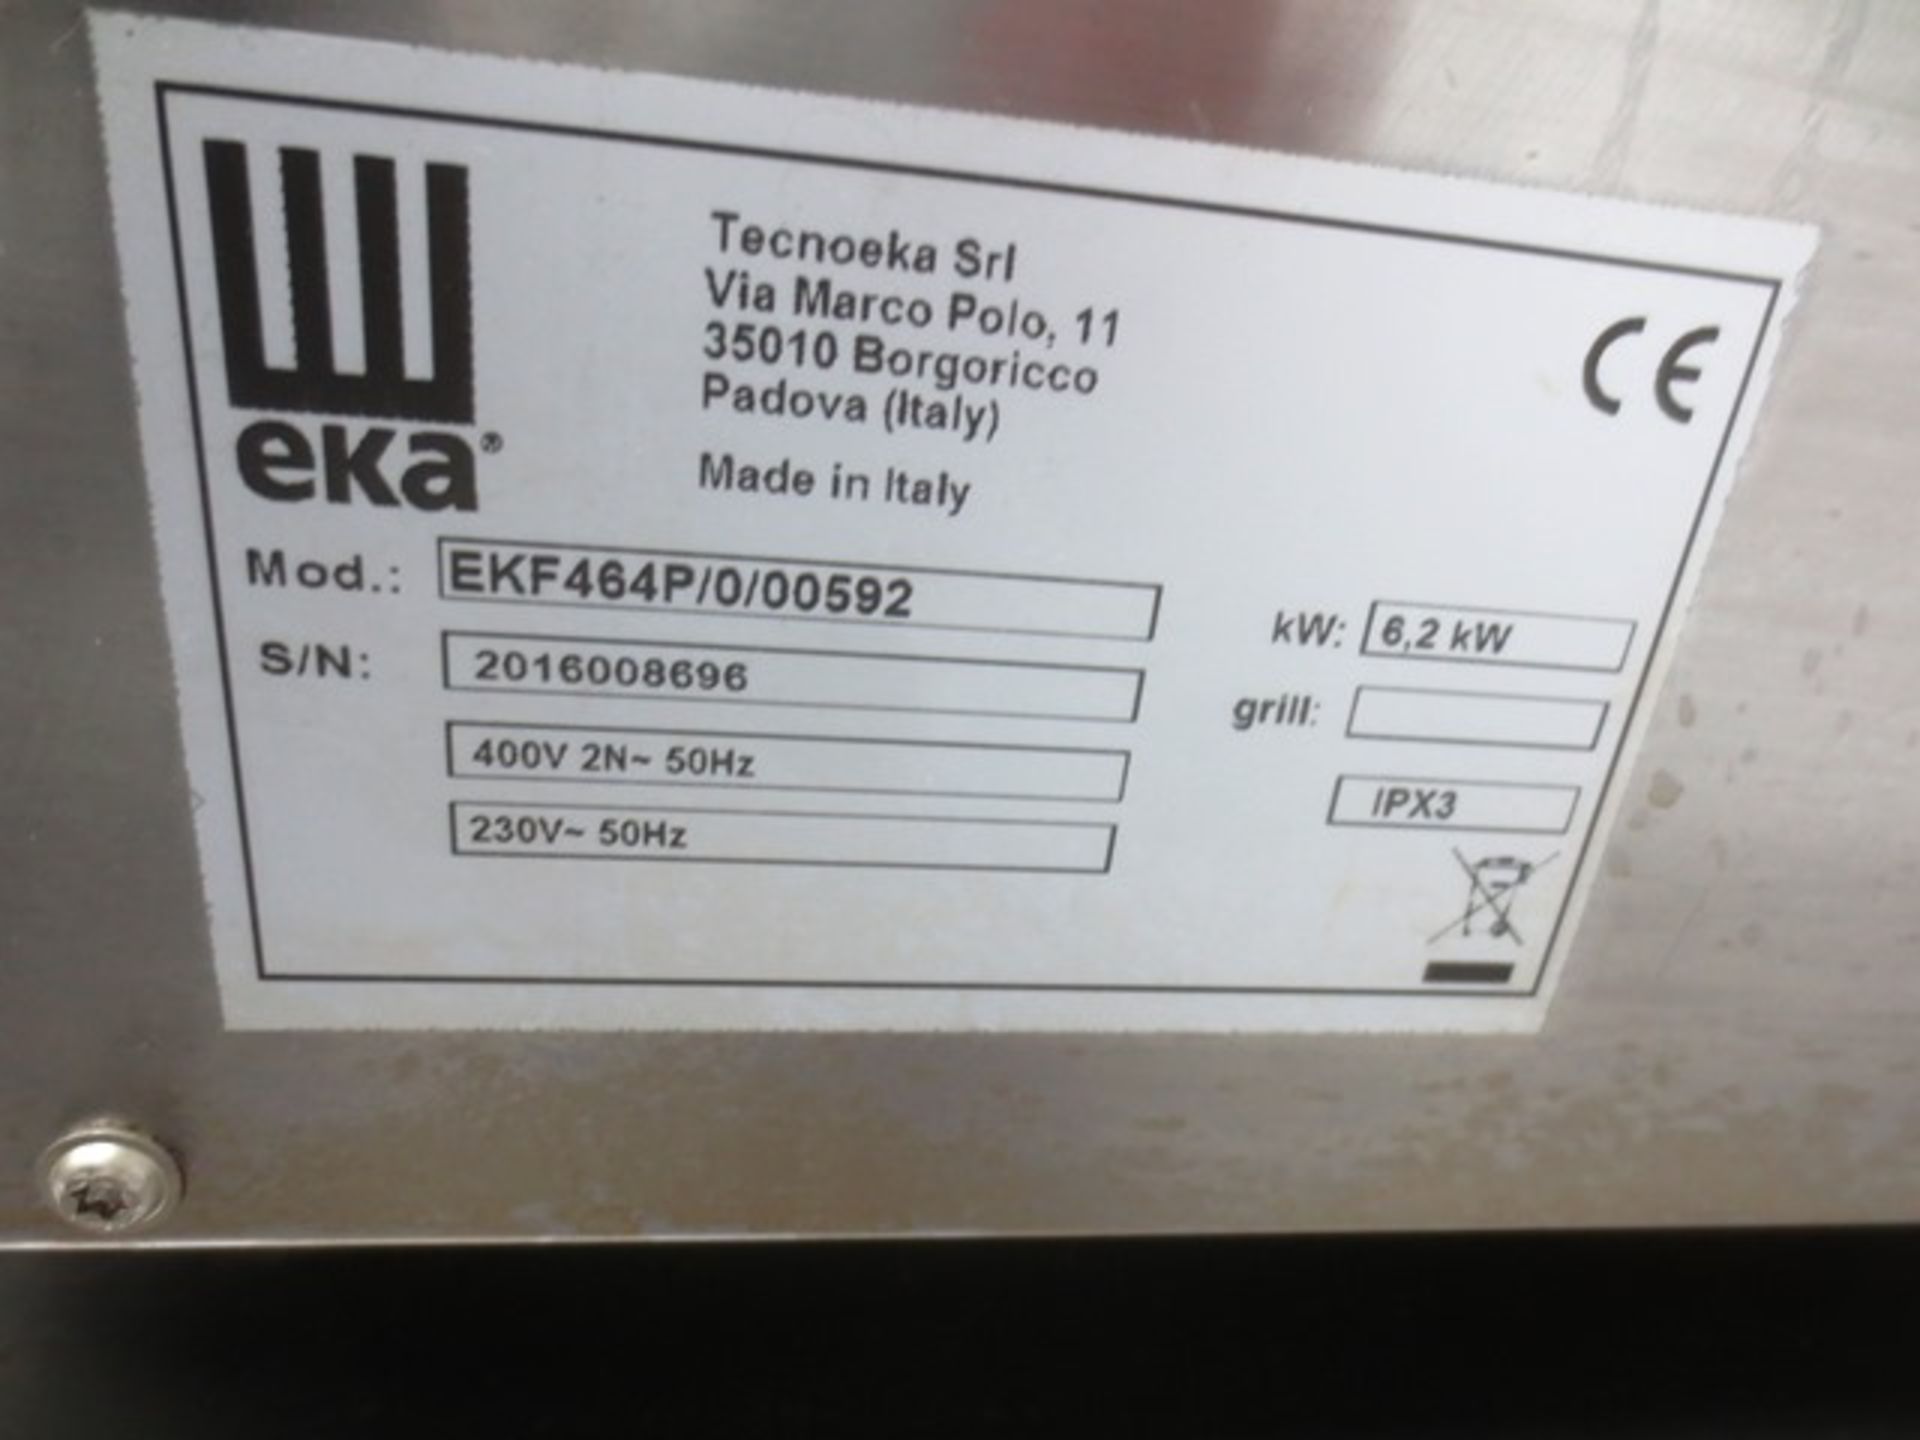 Eka stainless steel, glass fronted commercial oven, 3 phase, model EK F464 P/0/00592, serial no: - Image 2 of 2